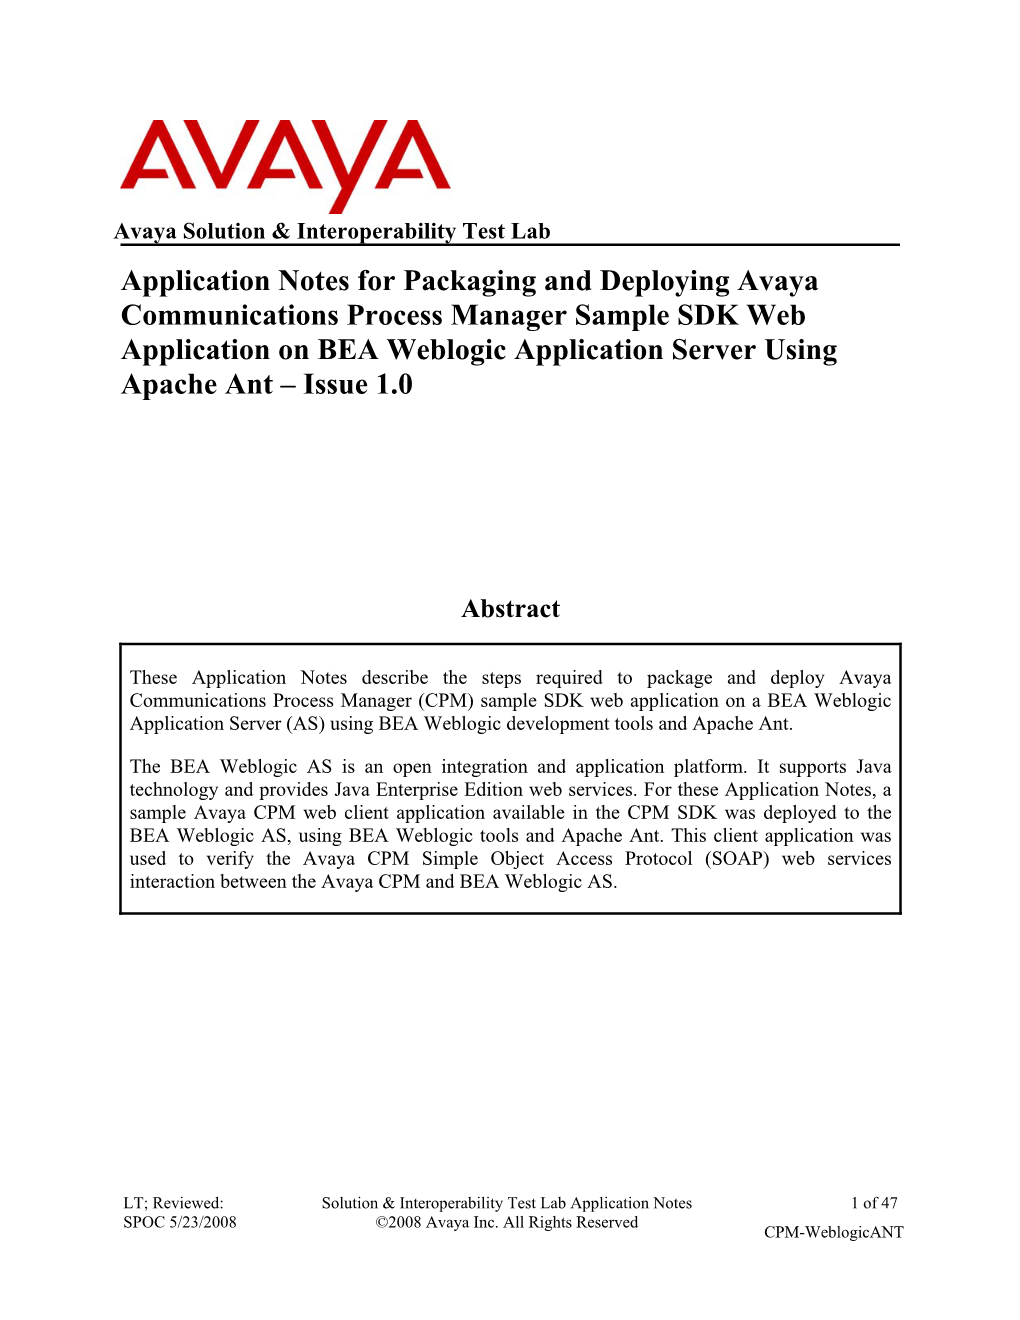 Application Notes for Packaging and Deploying Avaya Communications Process Manager Sample SDK Web Application on BEA Weblogic Ap